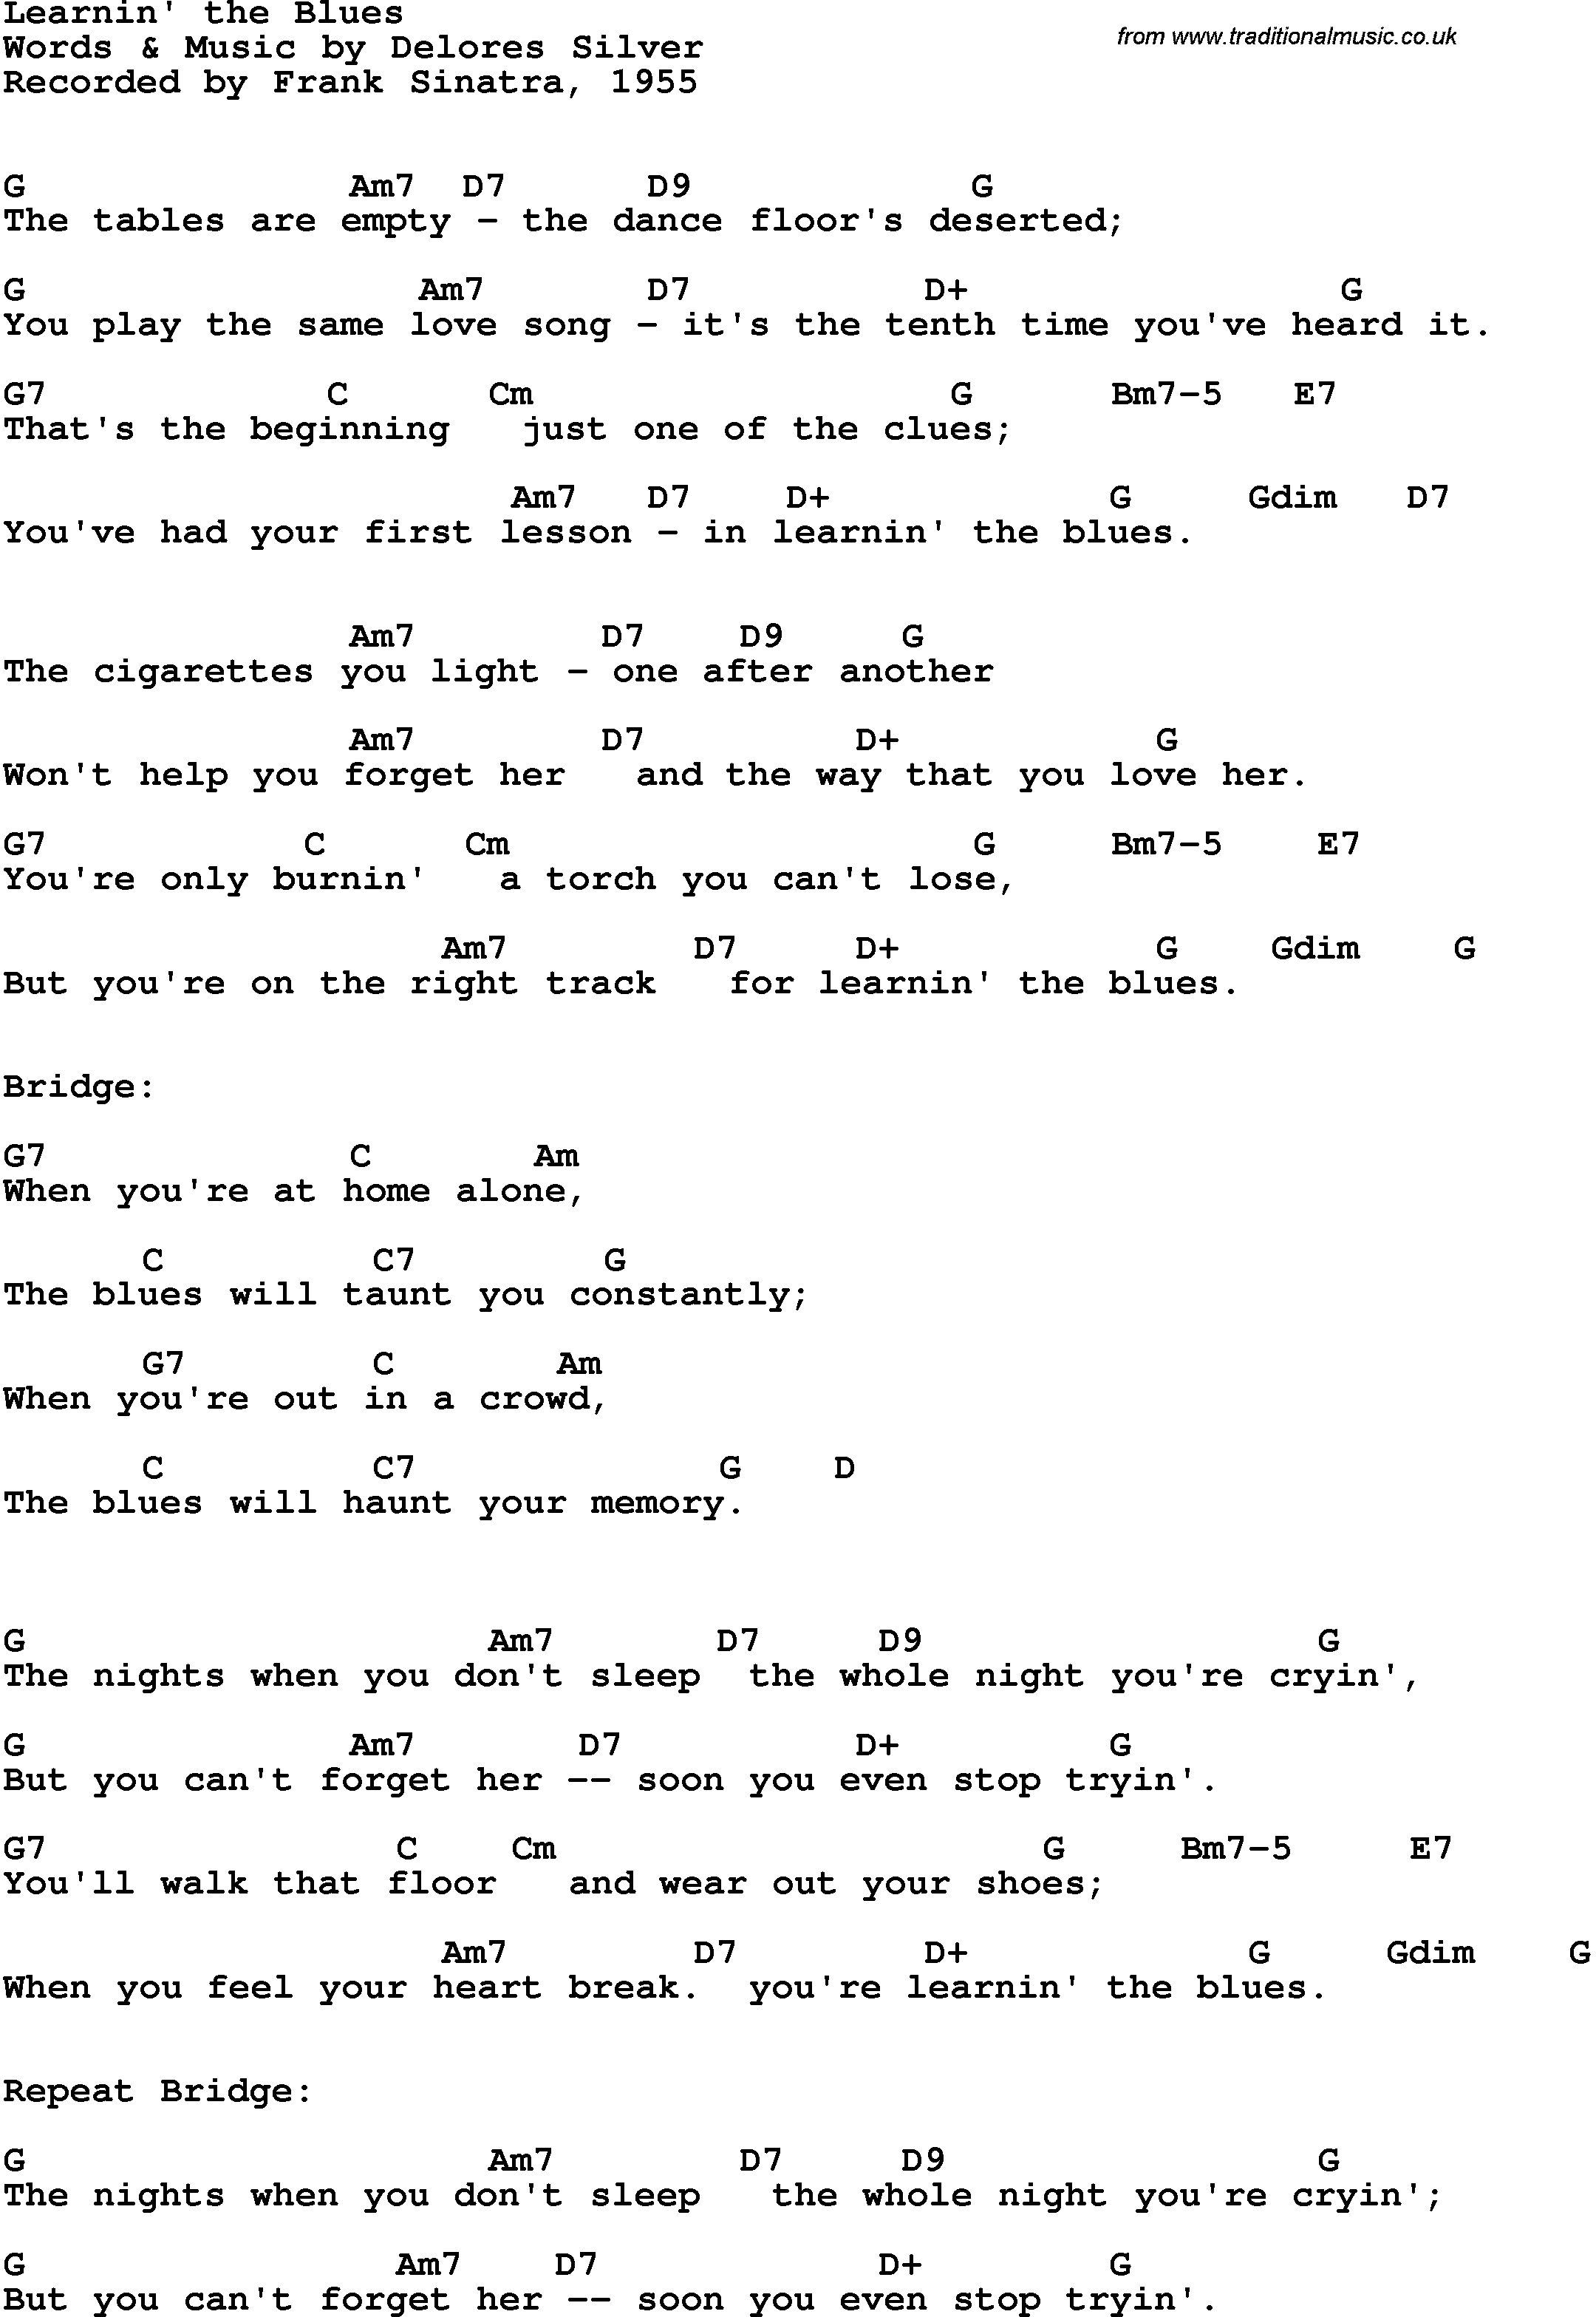 Song Lyrics with guitar chords for Learnin' The Blues - Frank Sinatra, 1955